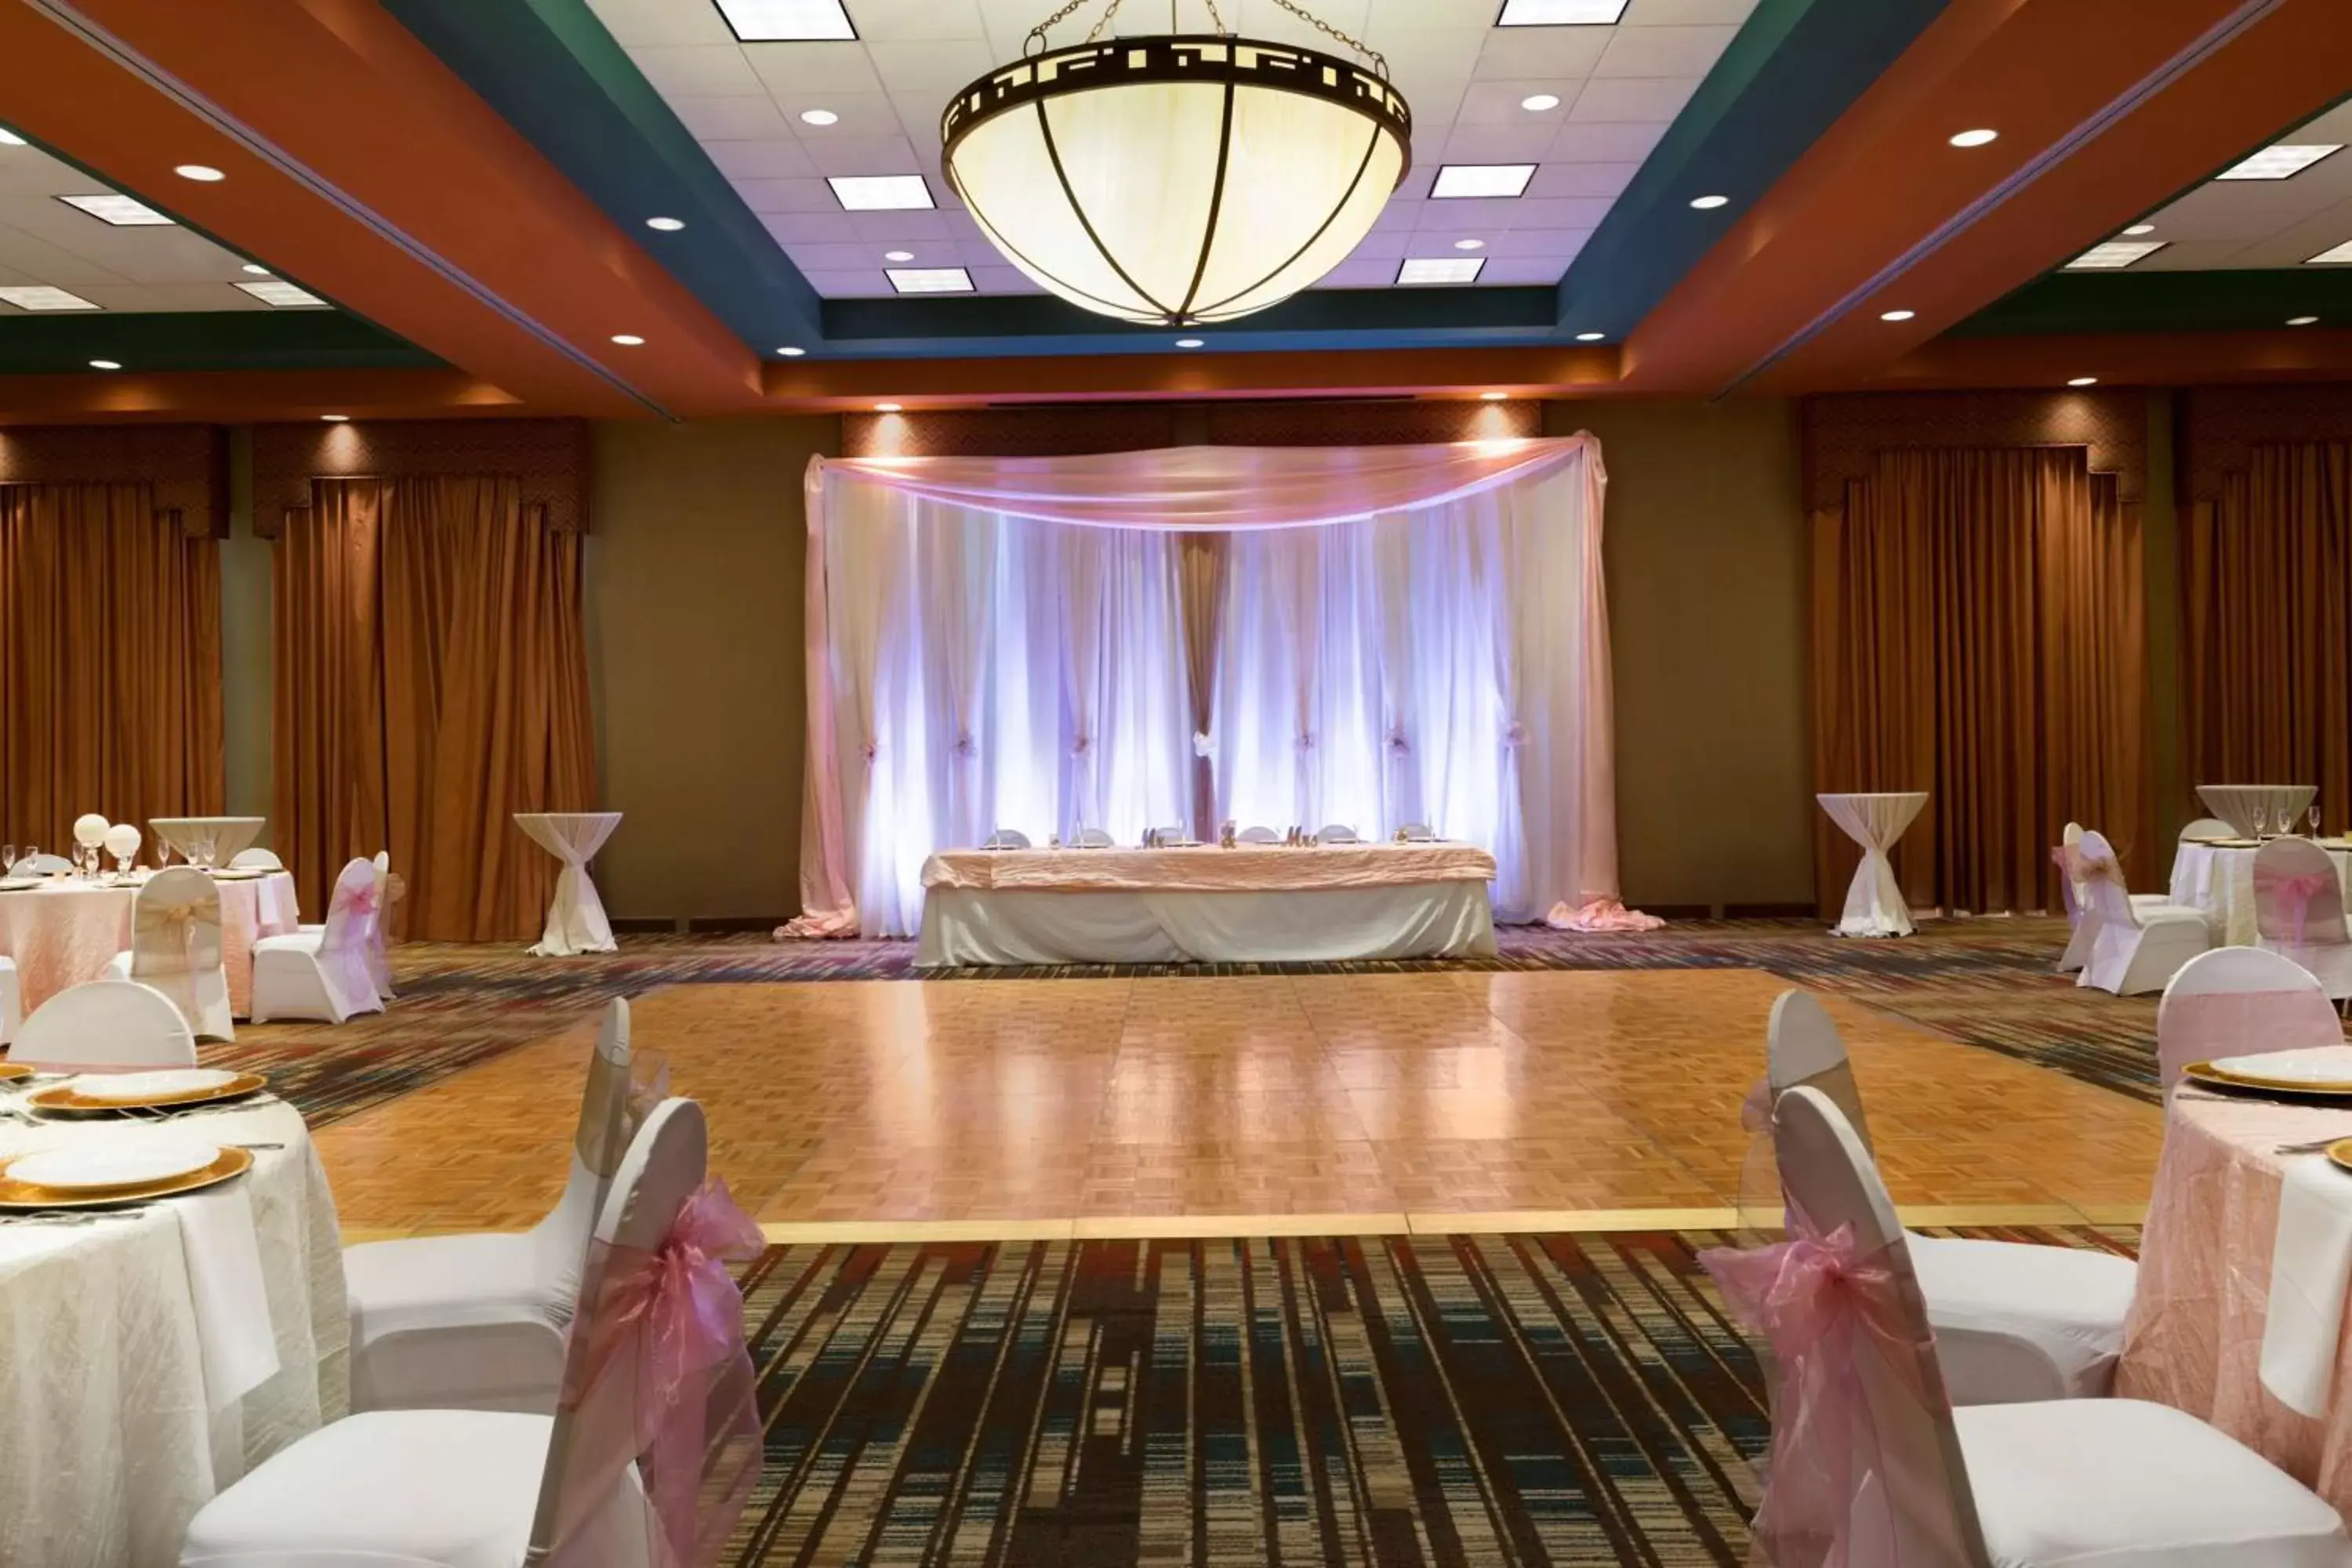 Meeting/conference room, Banquet Facilities in Embassy Suites by Hilton Albuquerque